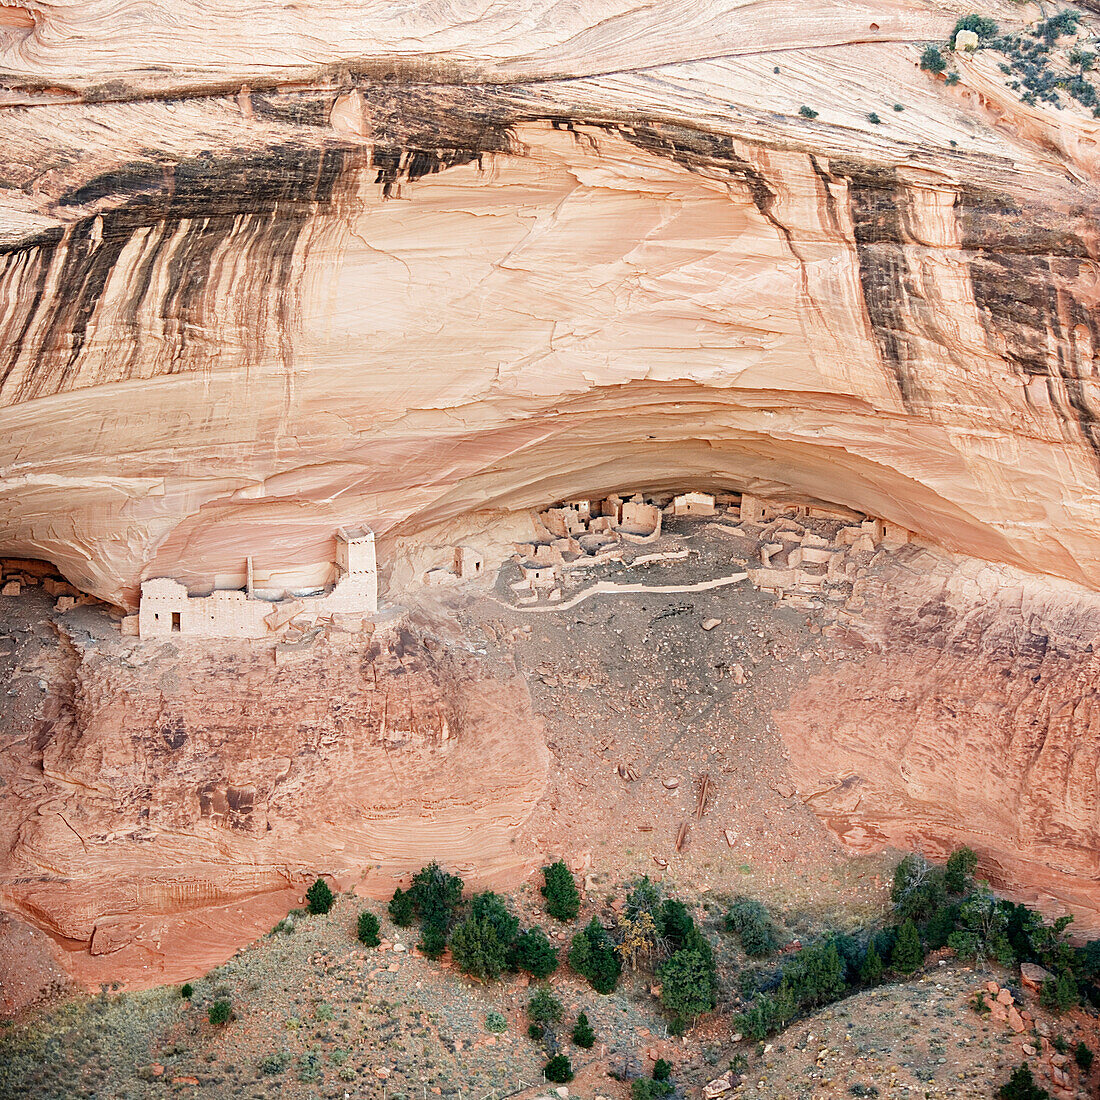 High angle view of the Mummy Cave ruins in the Canyon De Chelly National Monument, Arizona